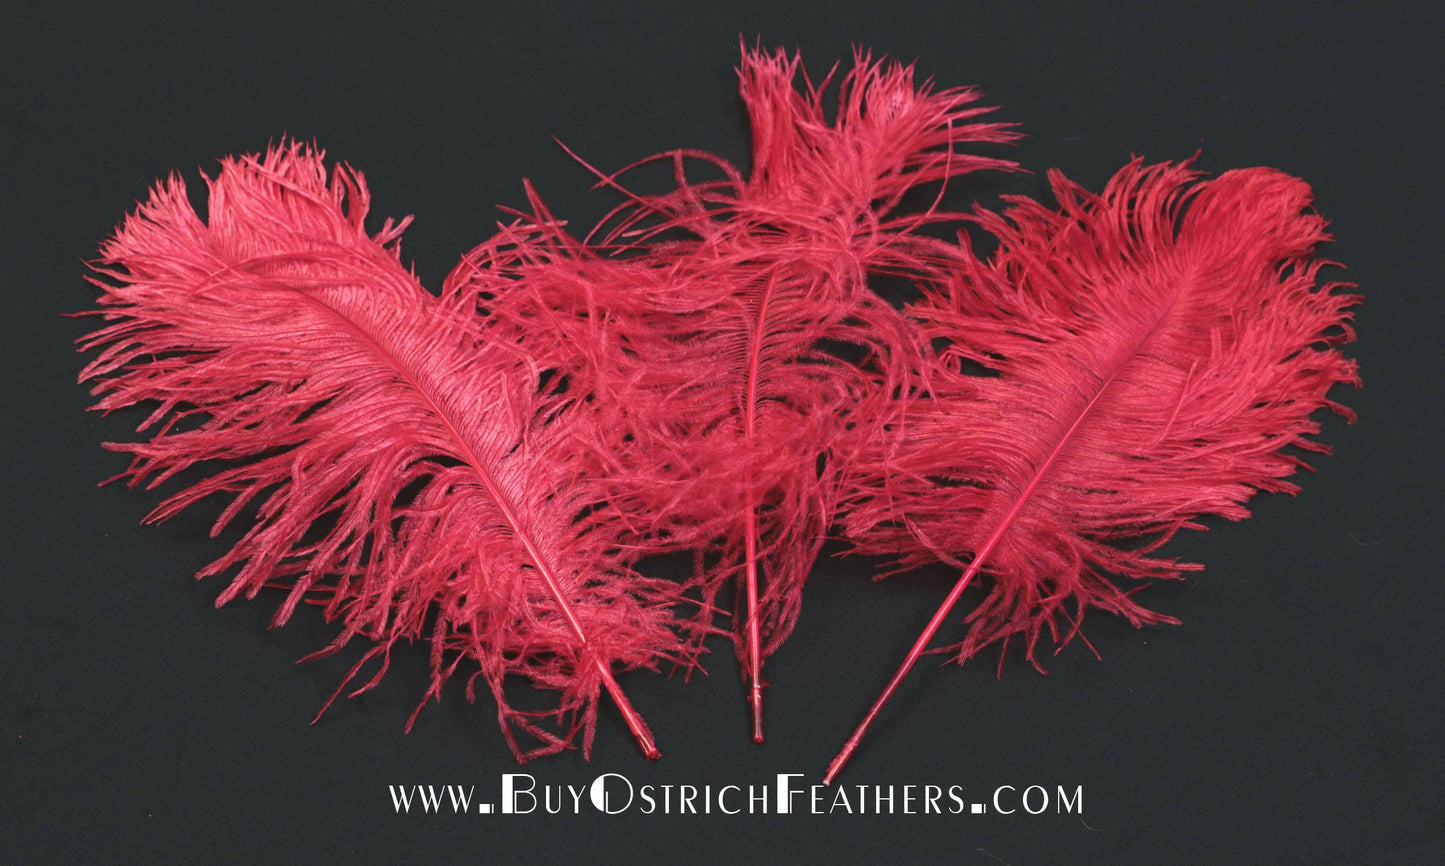 
                  
                    BULK 1/2lb Ostrich Feather Tail Plumes 15-20" (Red) - Buy Ostrich Feathers
                  
                